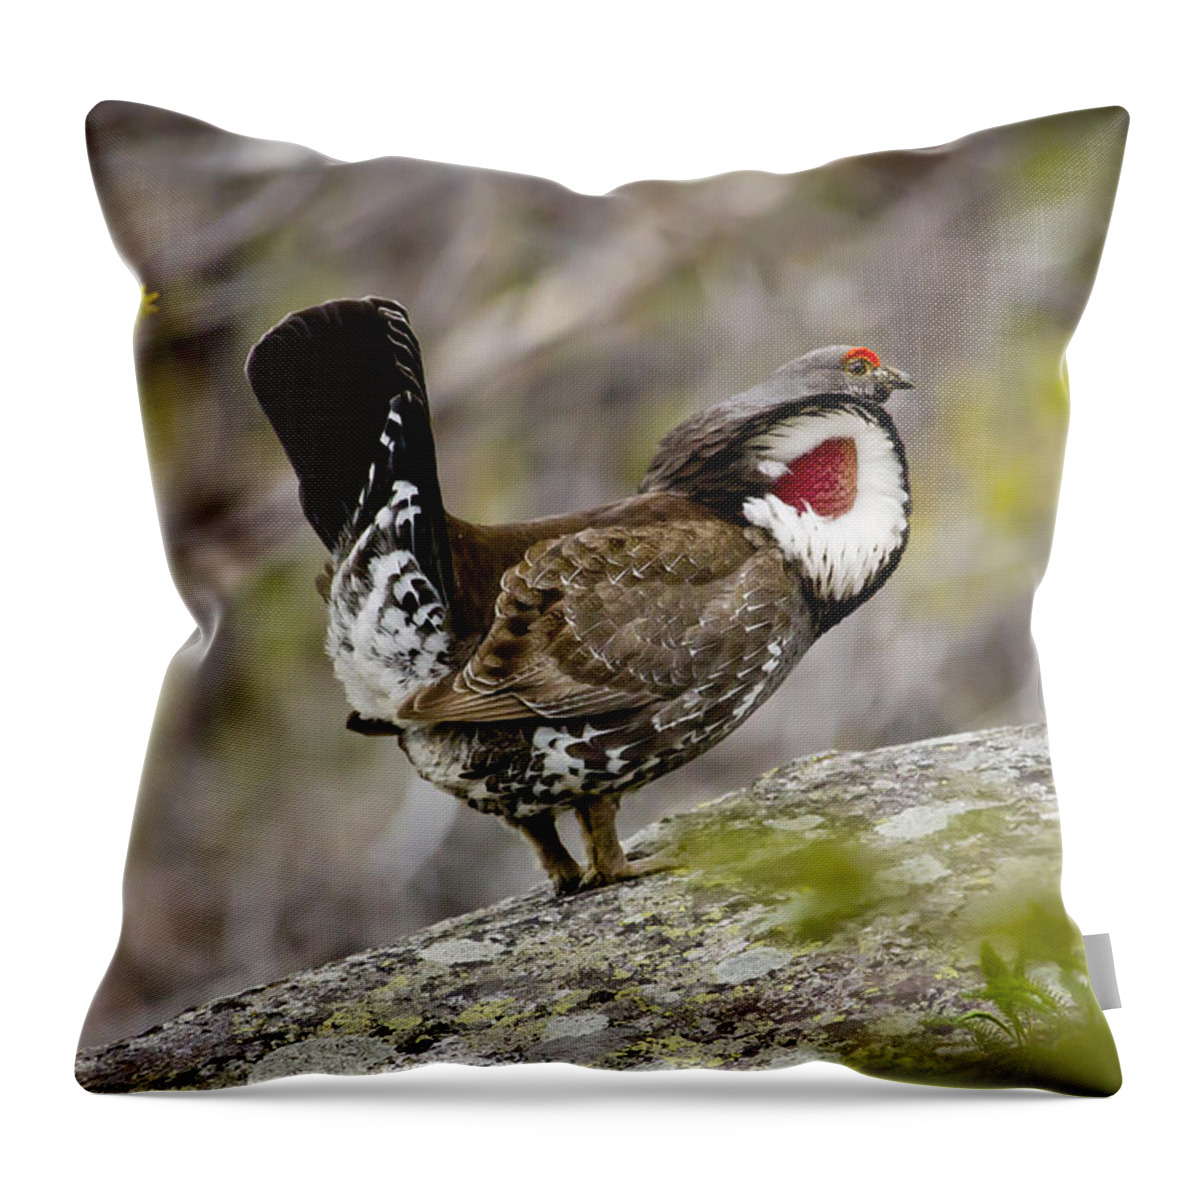 Wildlife Throw Pillow featuring the photograph Ruffled Grouse by Albert Seger